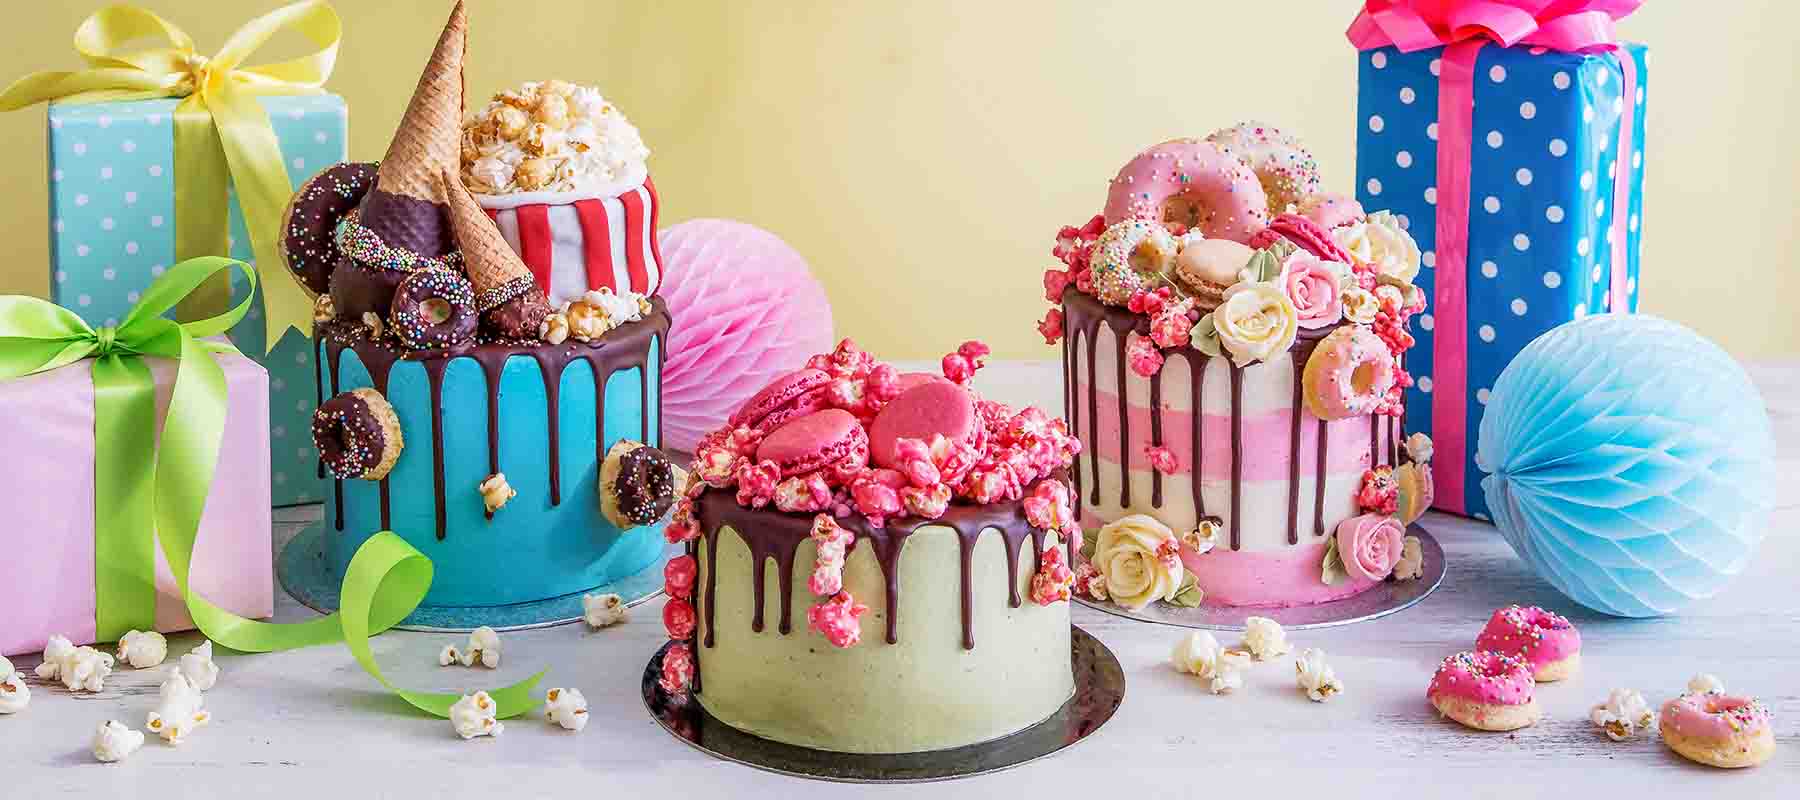 Birthday Cakes by Anges de Sucre